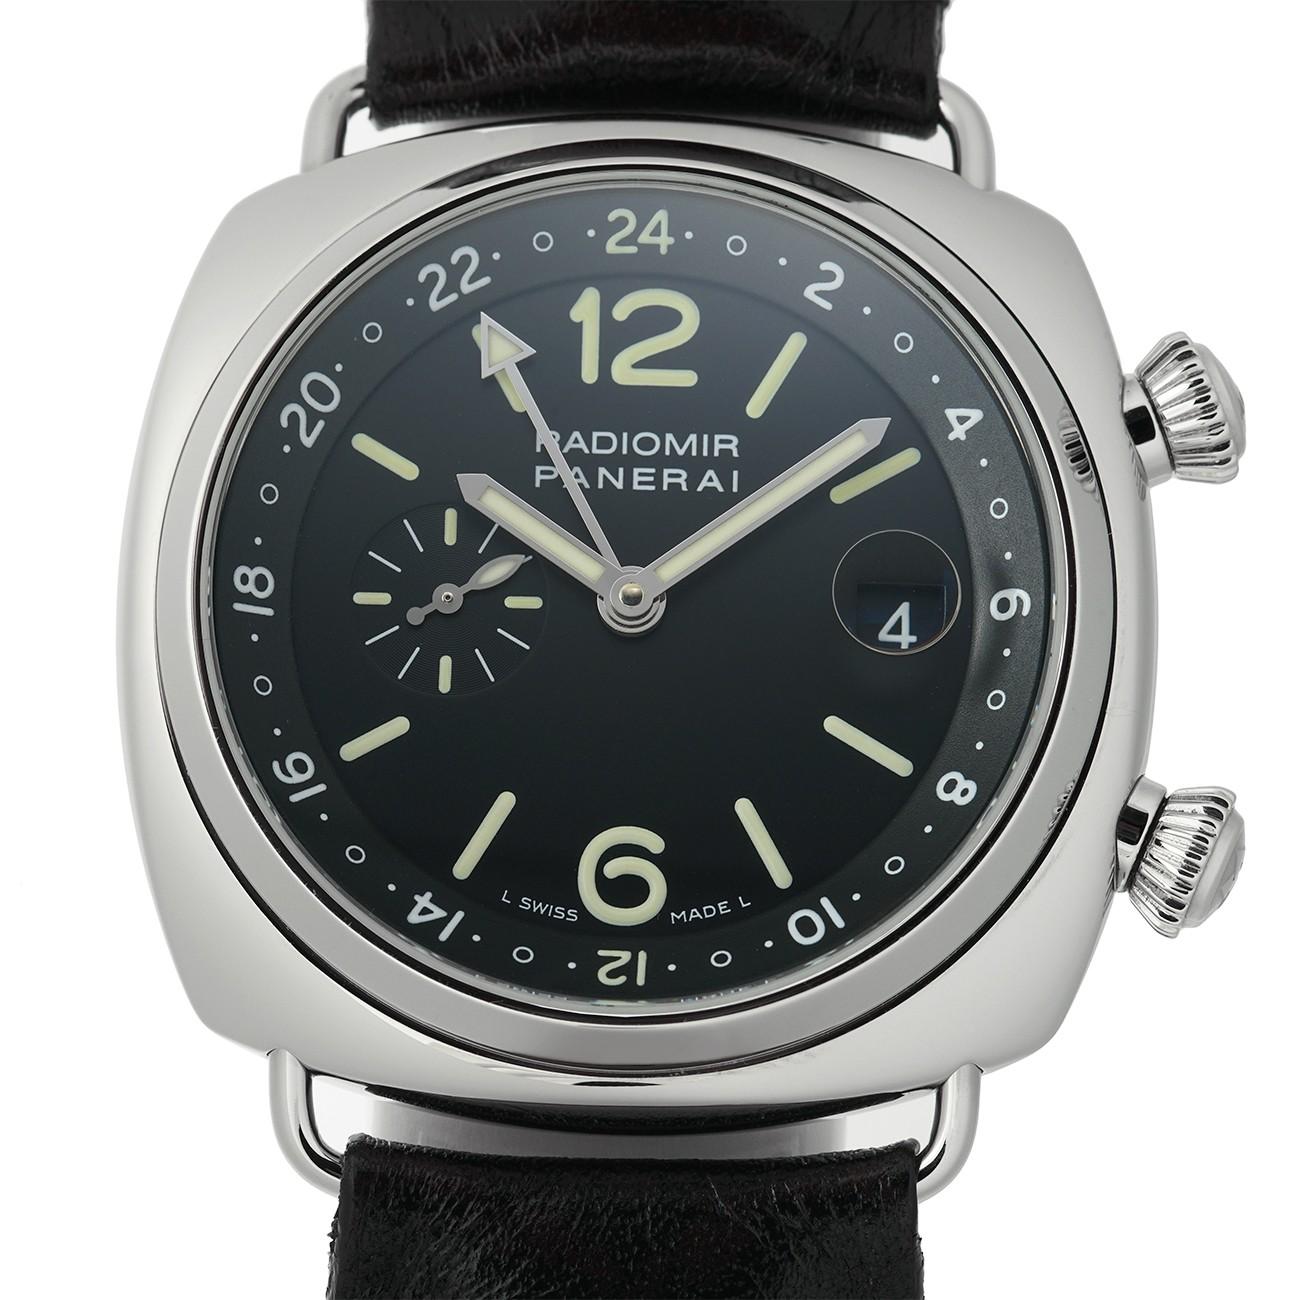 Contemporary Panerai Radiomir PAM00184, Black Dial, Certified and Warranty